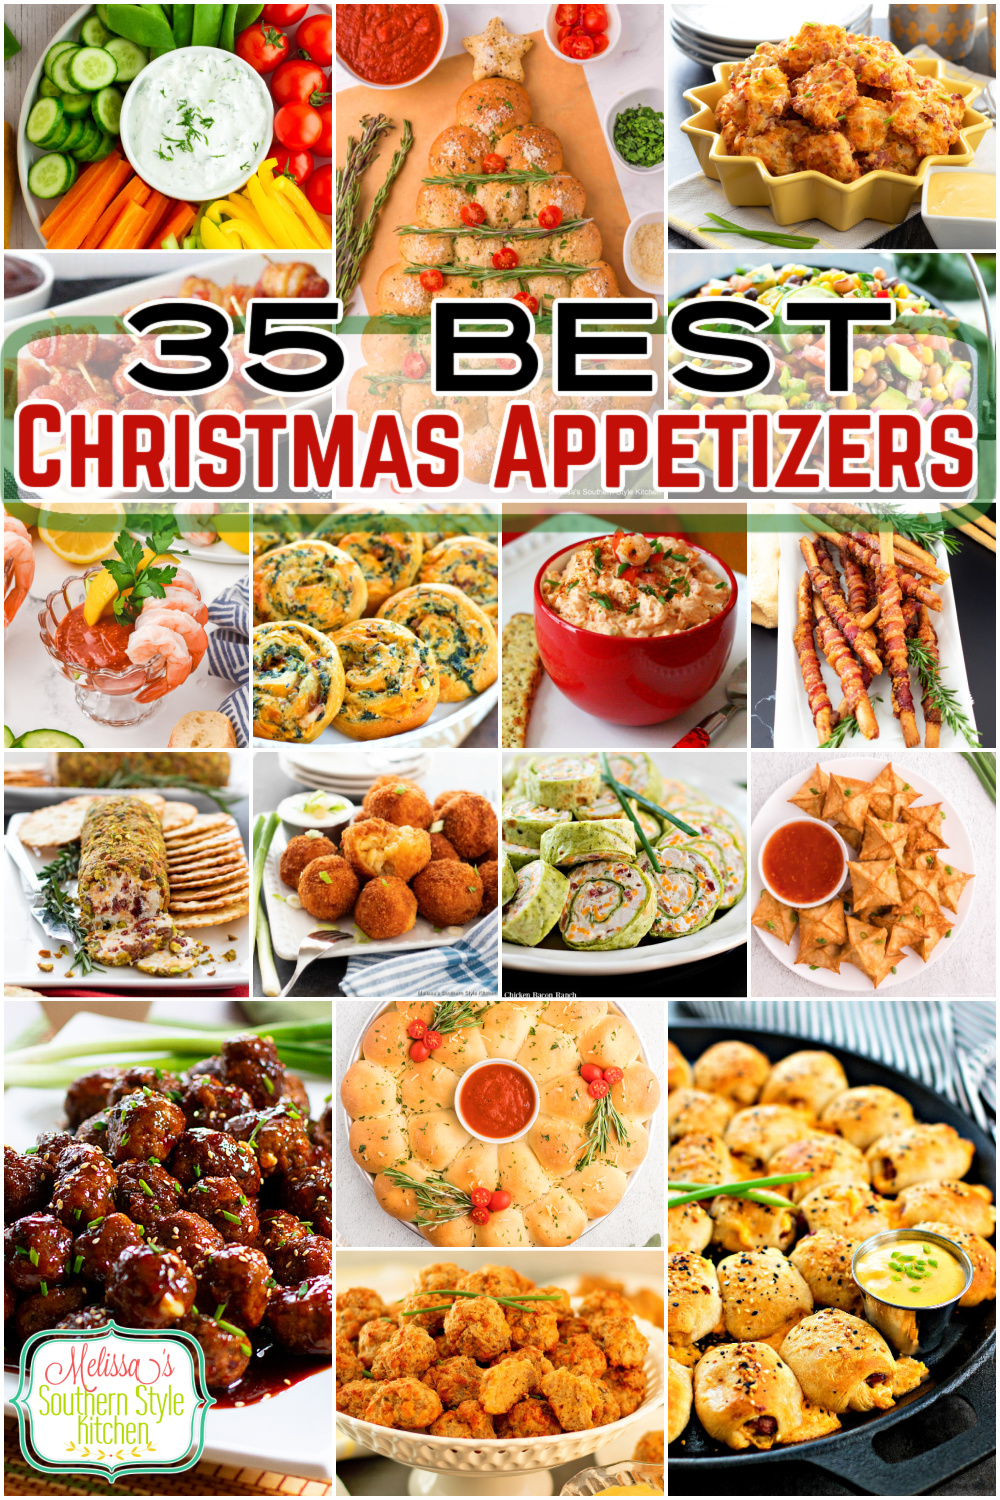 Get the party started with this collection of 35 of the Best Christmas Appetizer Recipes to kick start the holiday celebrations! #christmasappetizers #appetizerrecipes #christmasrecipes #easyappetizers via @melissasssk